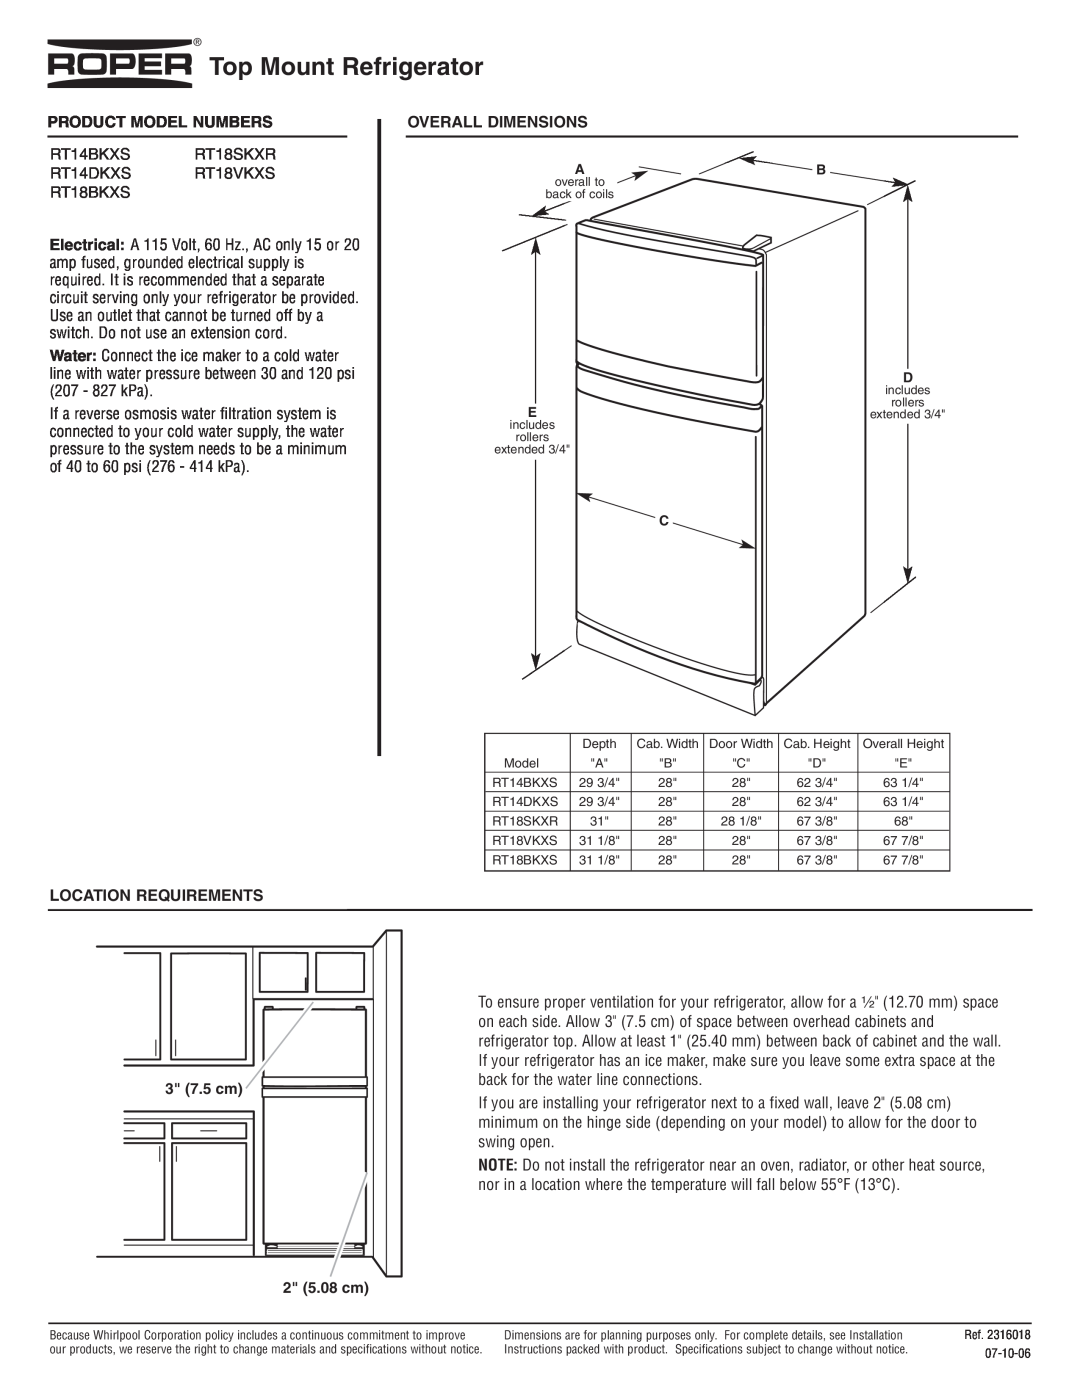 Roper RT18SKXR dimensions Top Mount Refrigerator, Product Model Numbers, Location Requirements, Overall Dimensions 